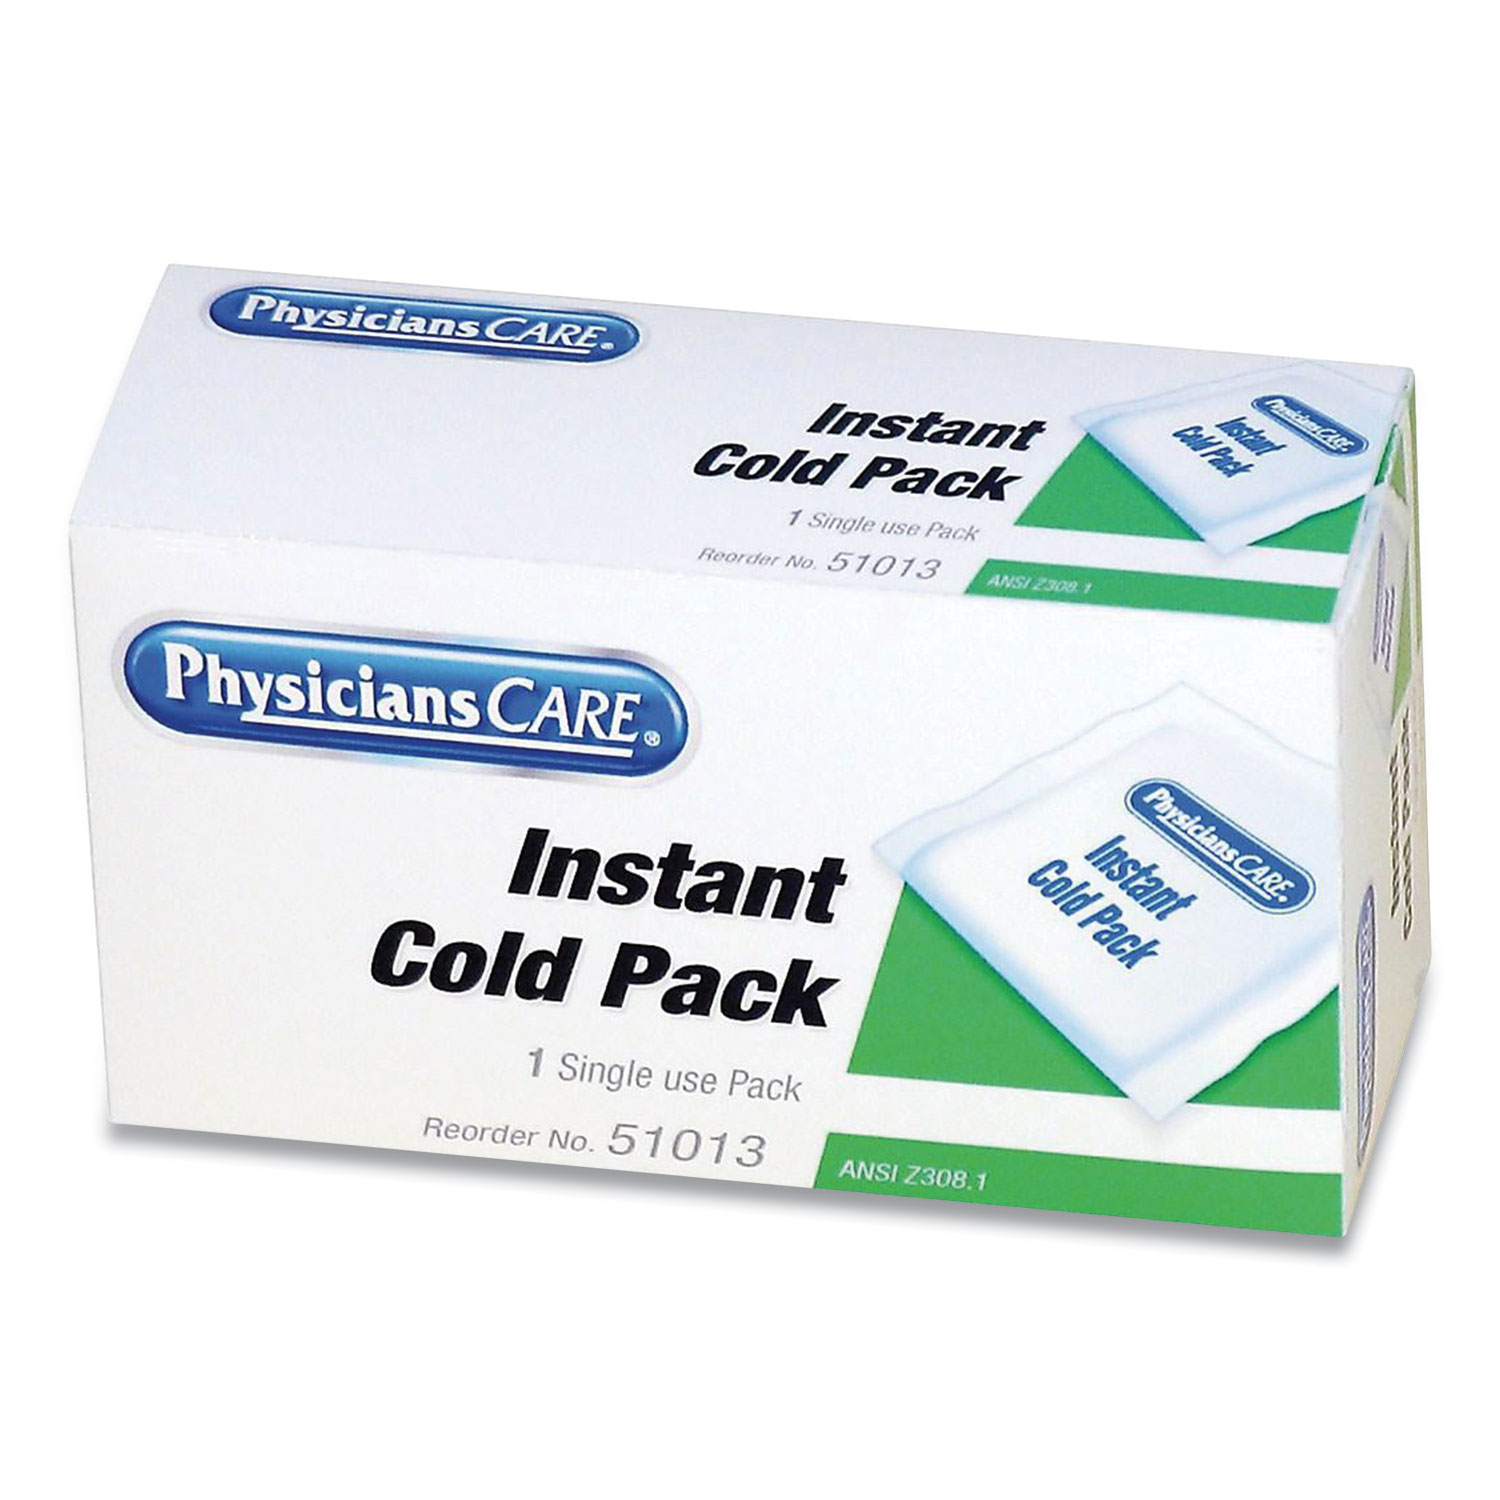 PhysiciansCare® Instant Cold Pack, 4 x 5